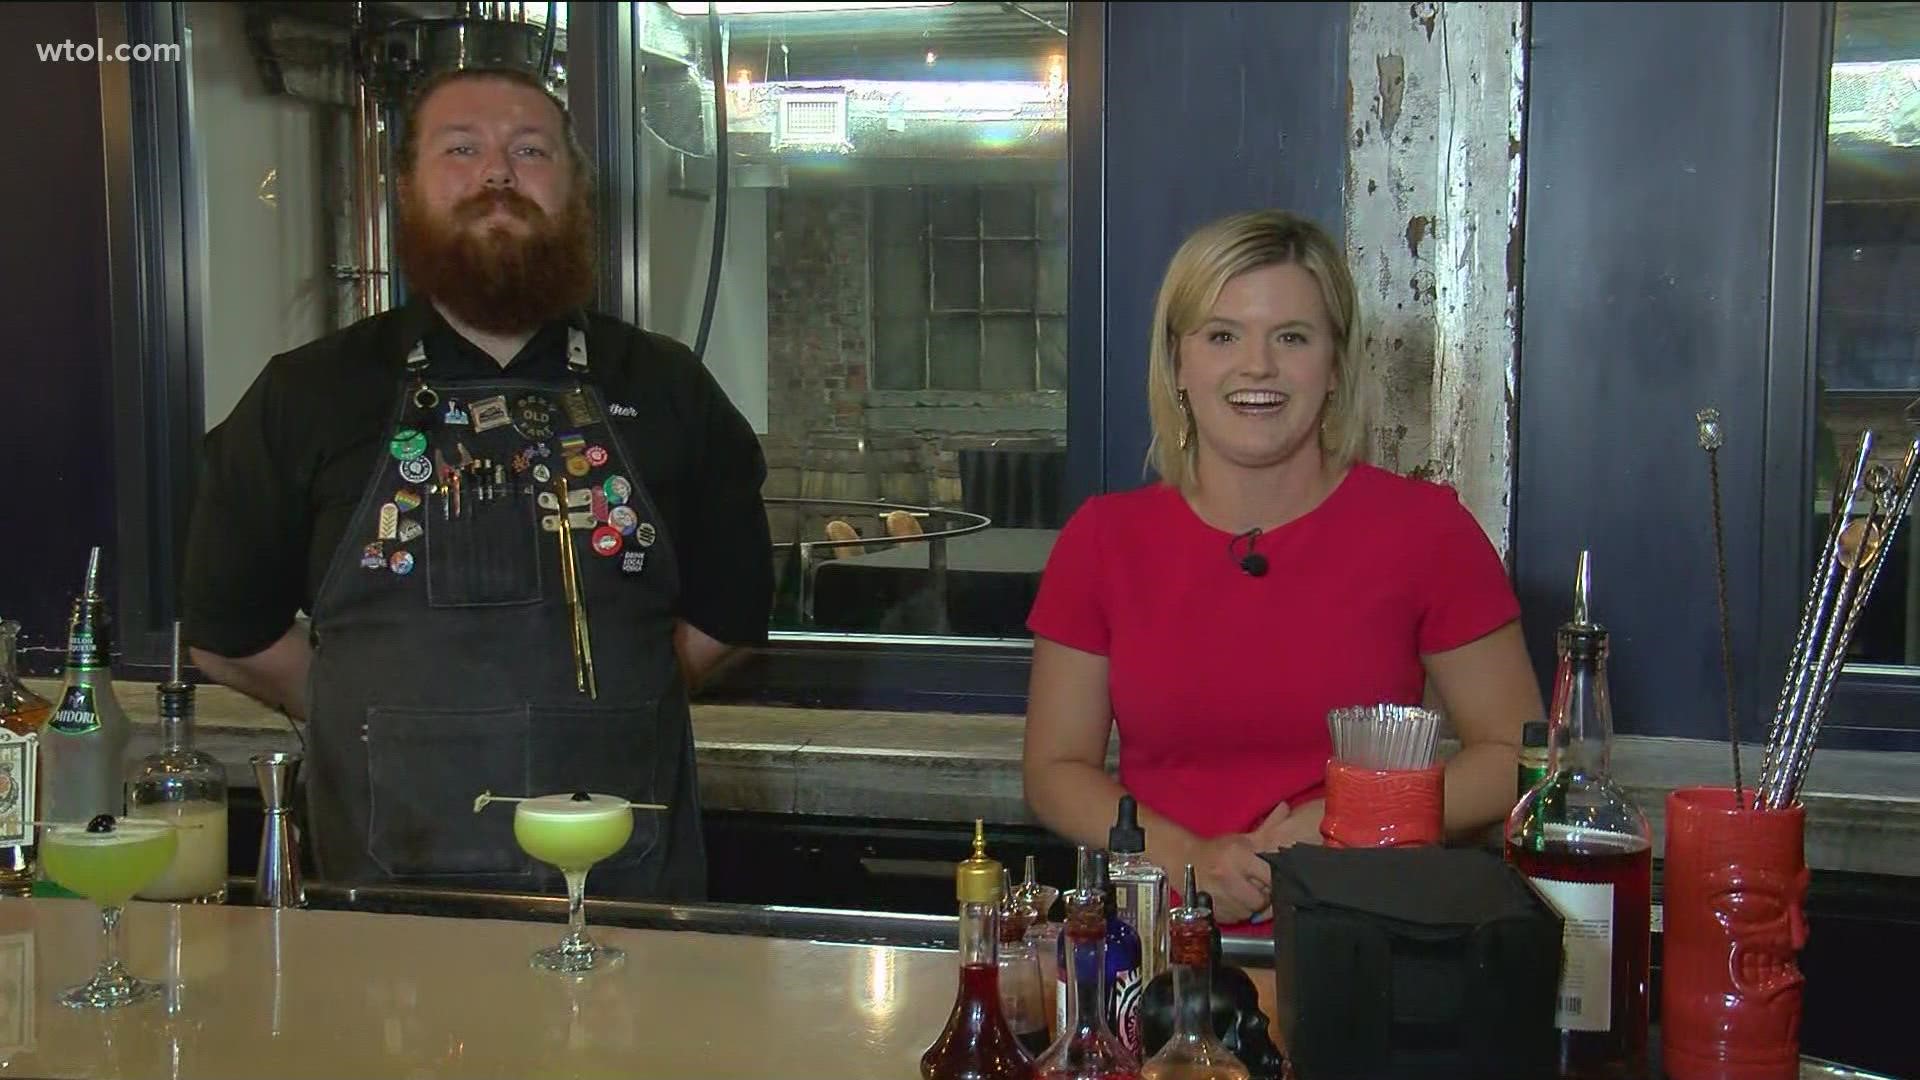 Toledo Spirits makes a cocktail called "The Japanese Slipper" and it's pretty tasty! We learn more about Toledo Spirits as part of National Small Business Week.